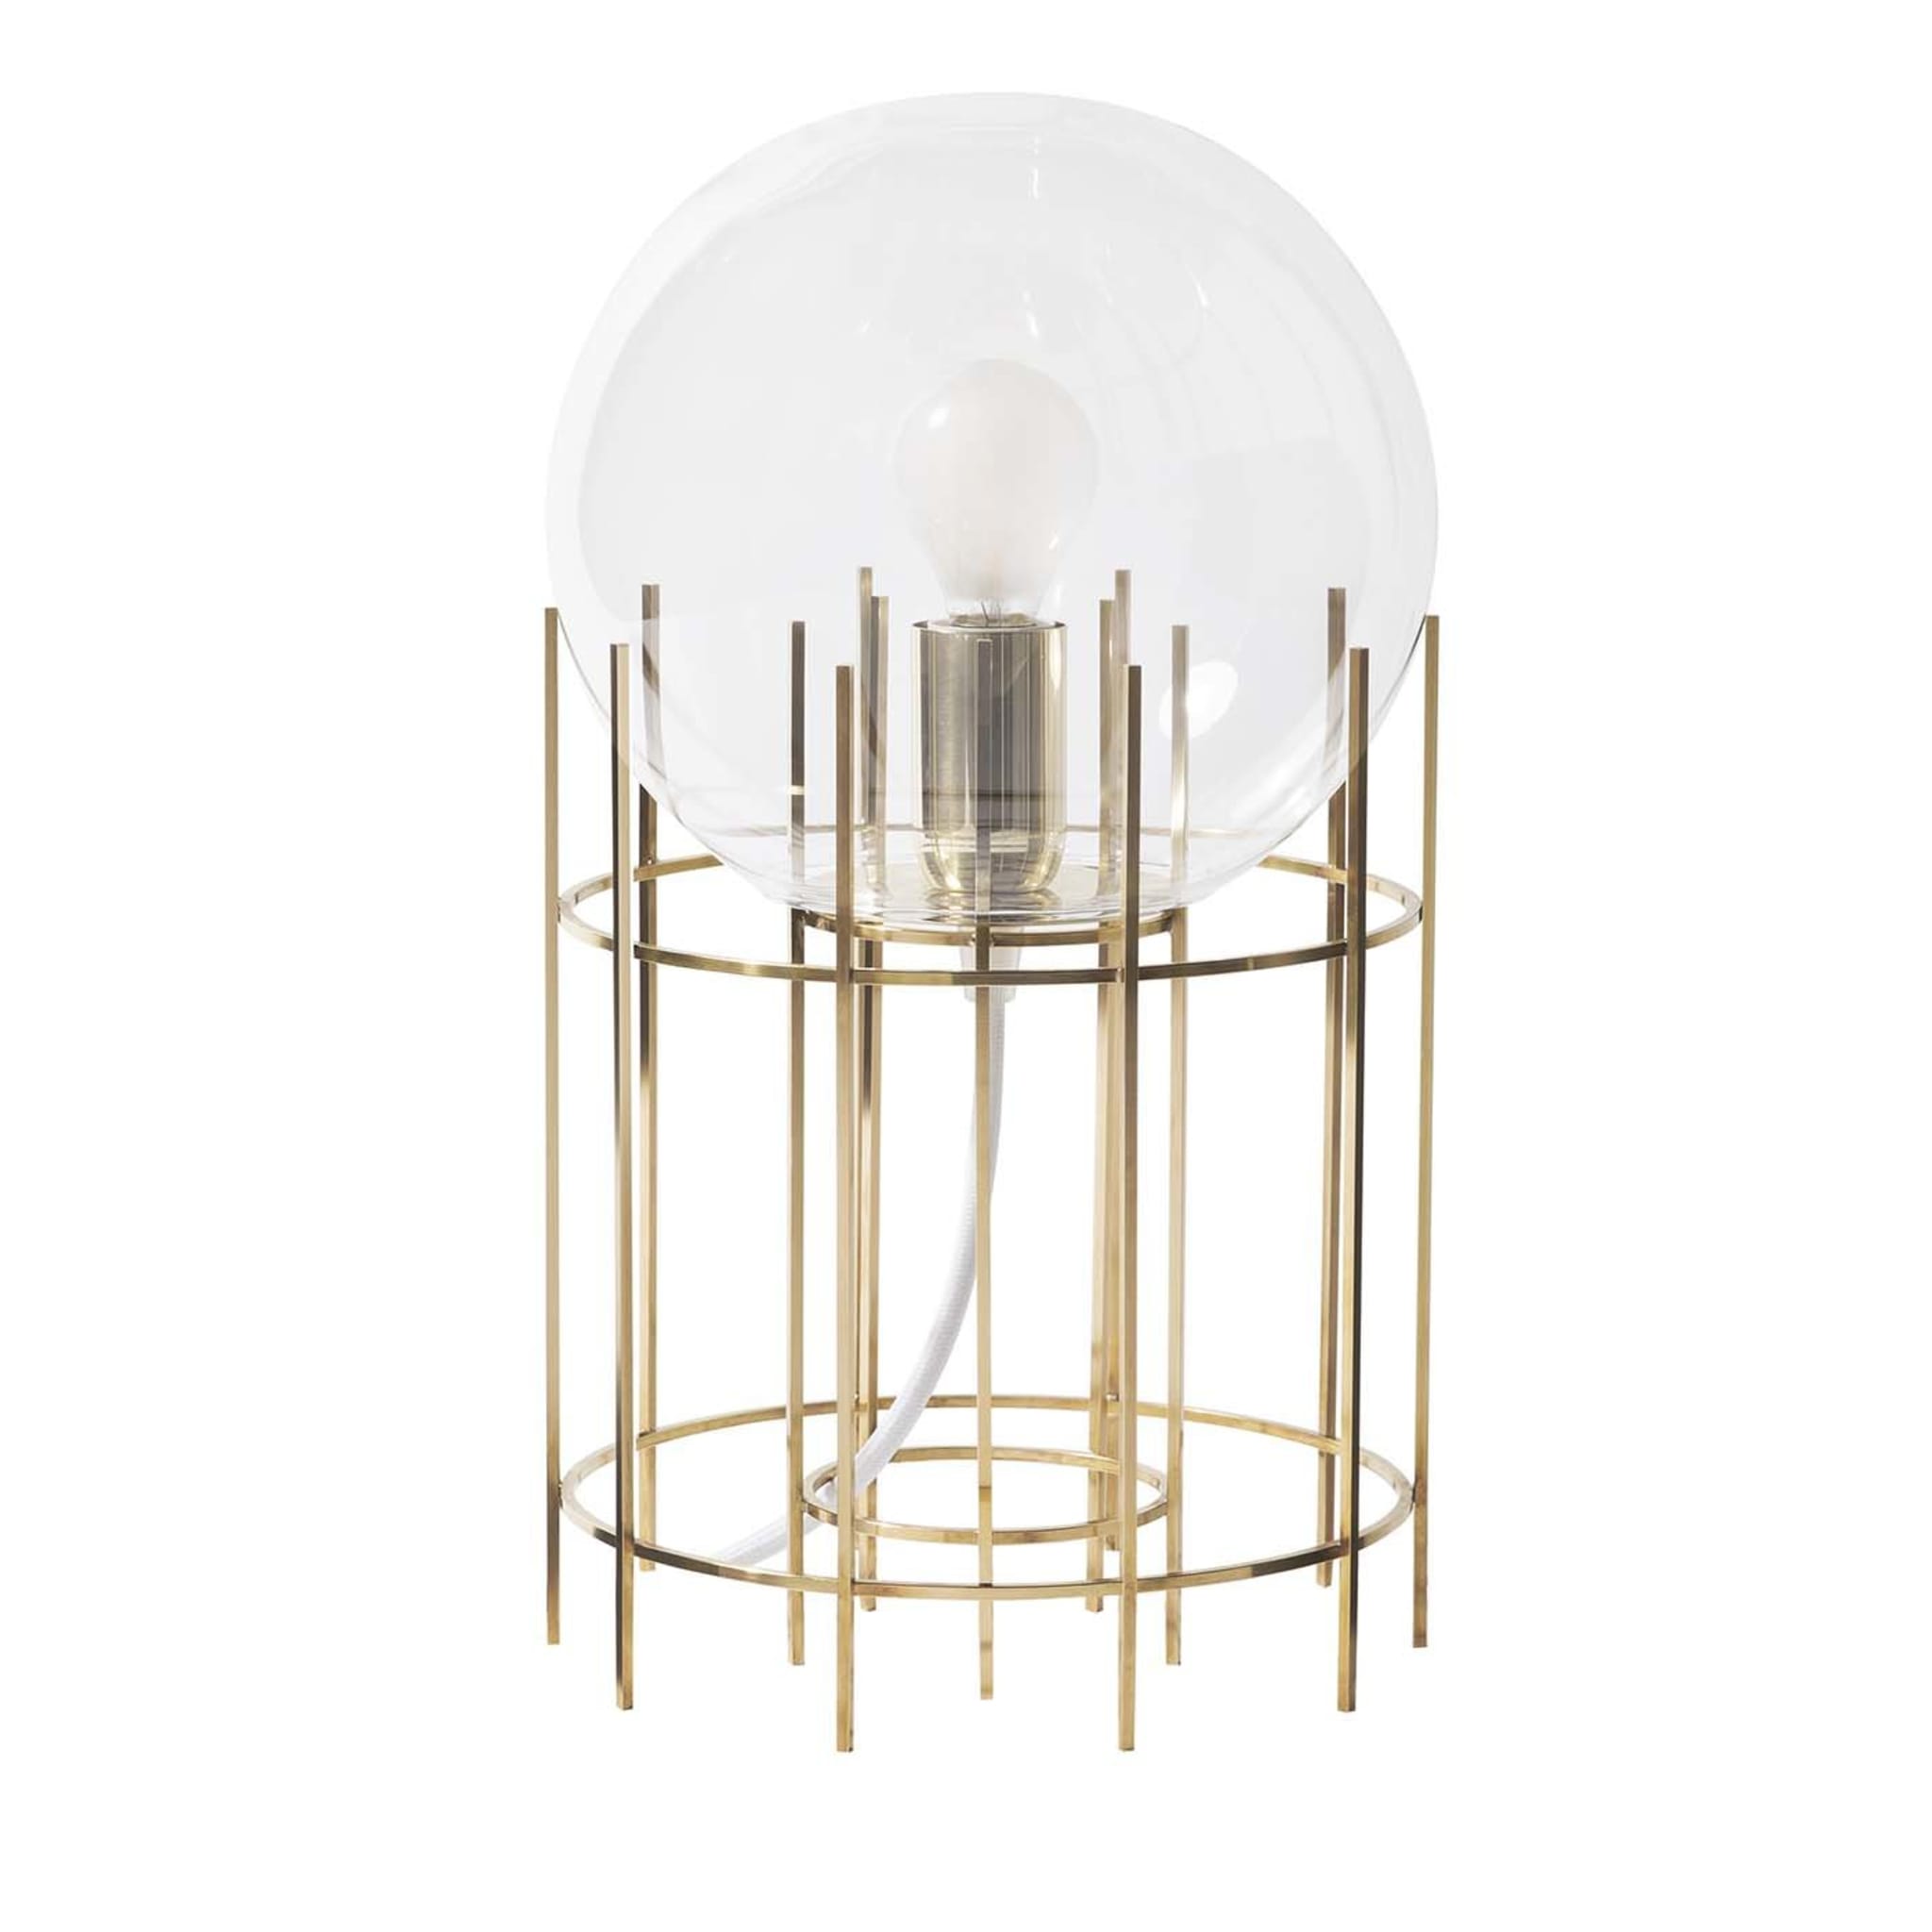 TPLG3 Polished Brass Table Lamp by GoodMorning studio - Main view